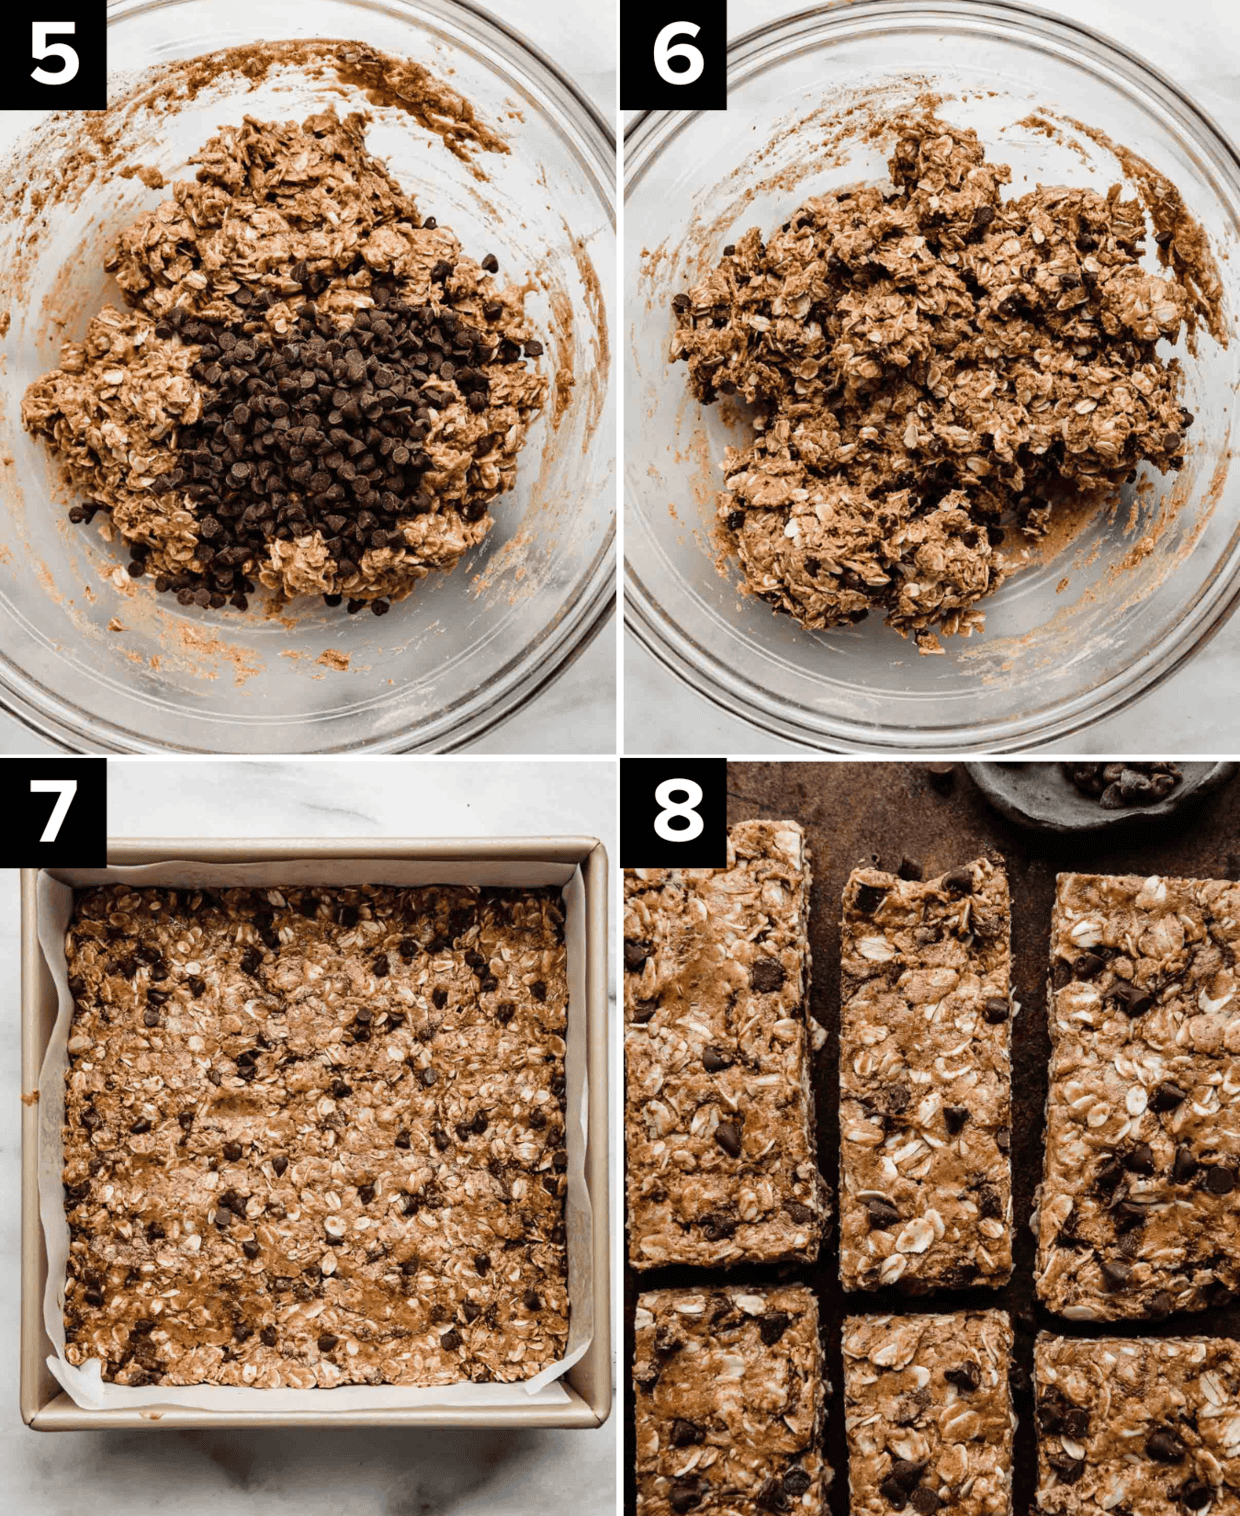 Four images, top left image is protein bar mixture in a glass bowl, top right image is glass bowl filled with mini chocolate chip peanut butter protein bars, bottom left image is a square pan filled with Chocolate Peanut Butter Protein Bars mixture, bottom right image is homemade protein bars on a brown background. 